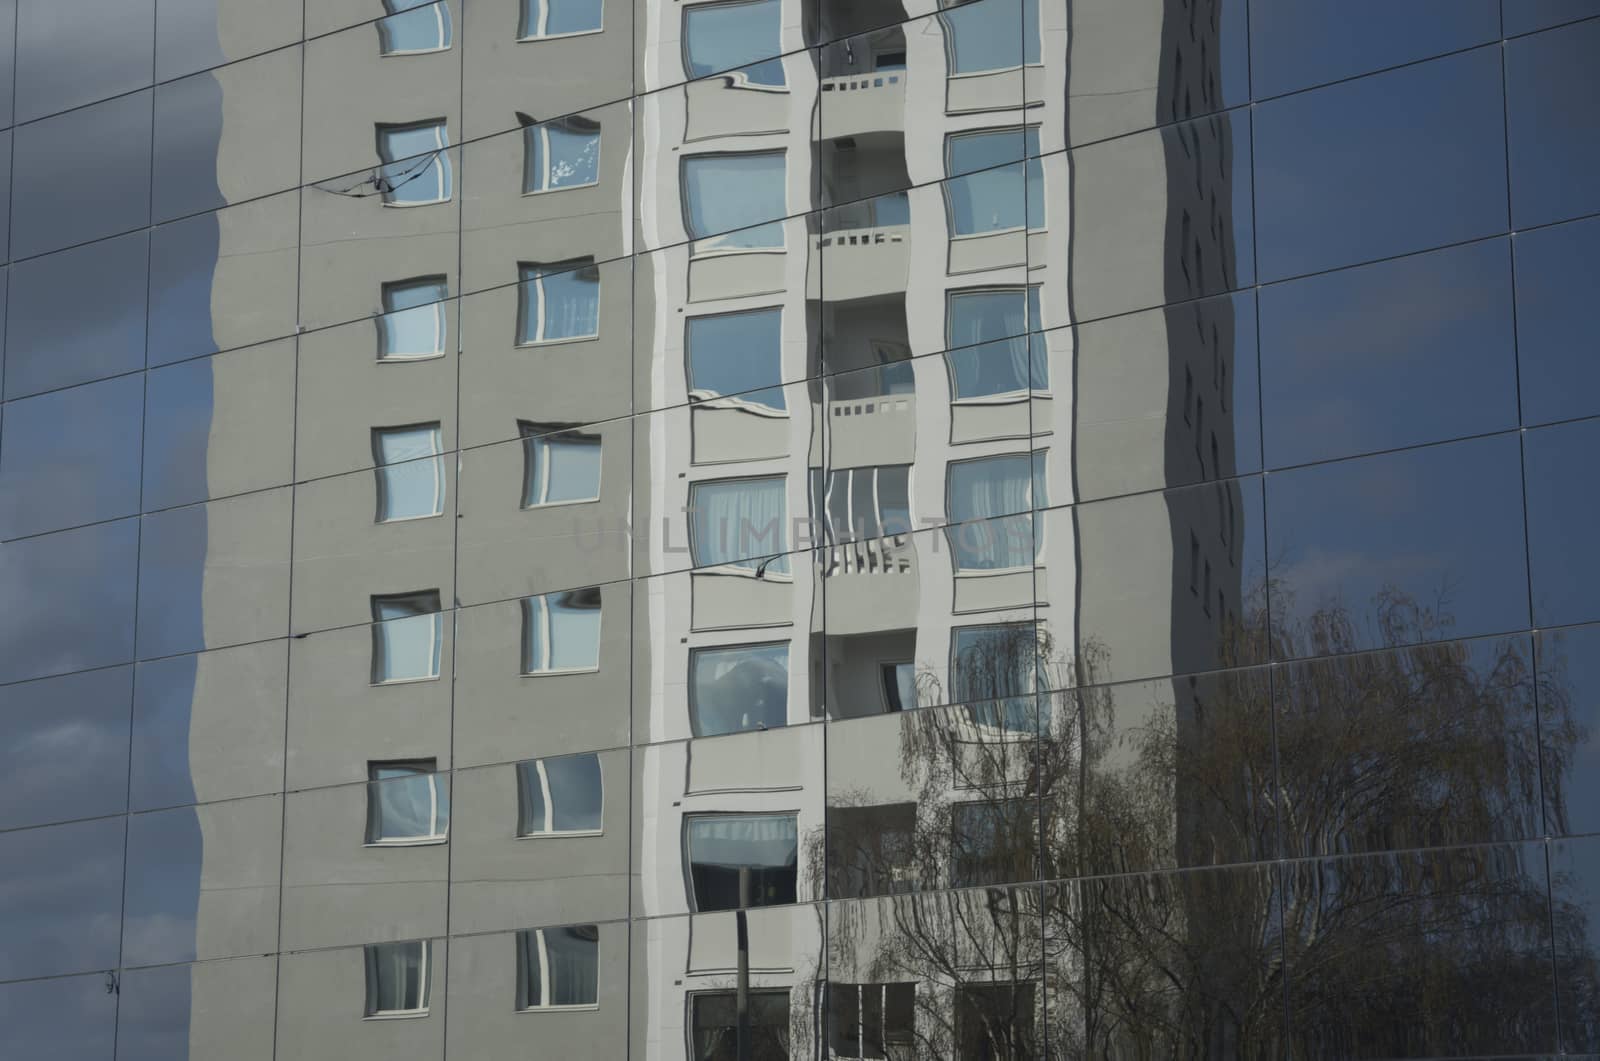 VALLINGBY, STOCKHOLM, SWEDEN ON APRIL 20, 2014: Fifties high rise residential building reflected in new glass architecture on April 20, 2014 in west suburb Vallingby, Stockholm, Sweden.